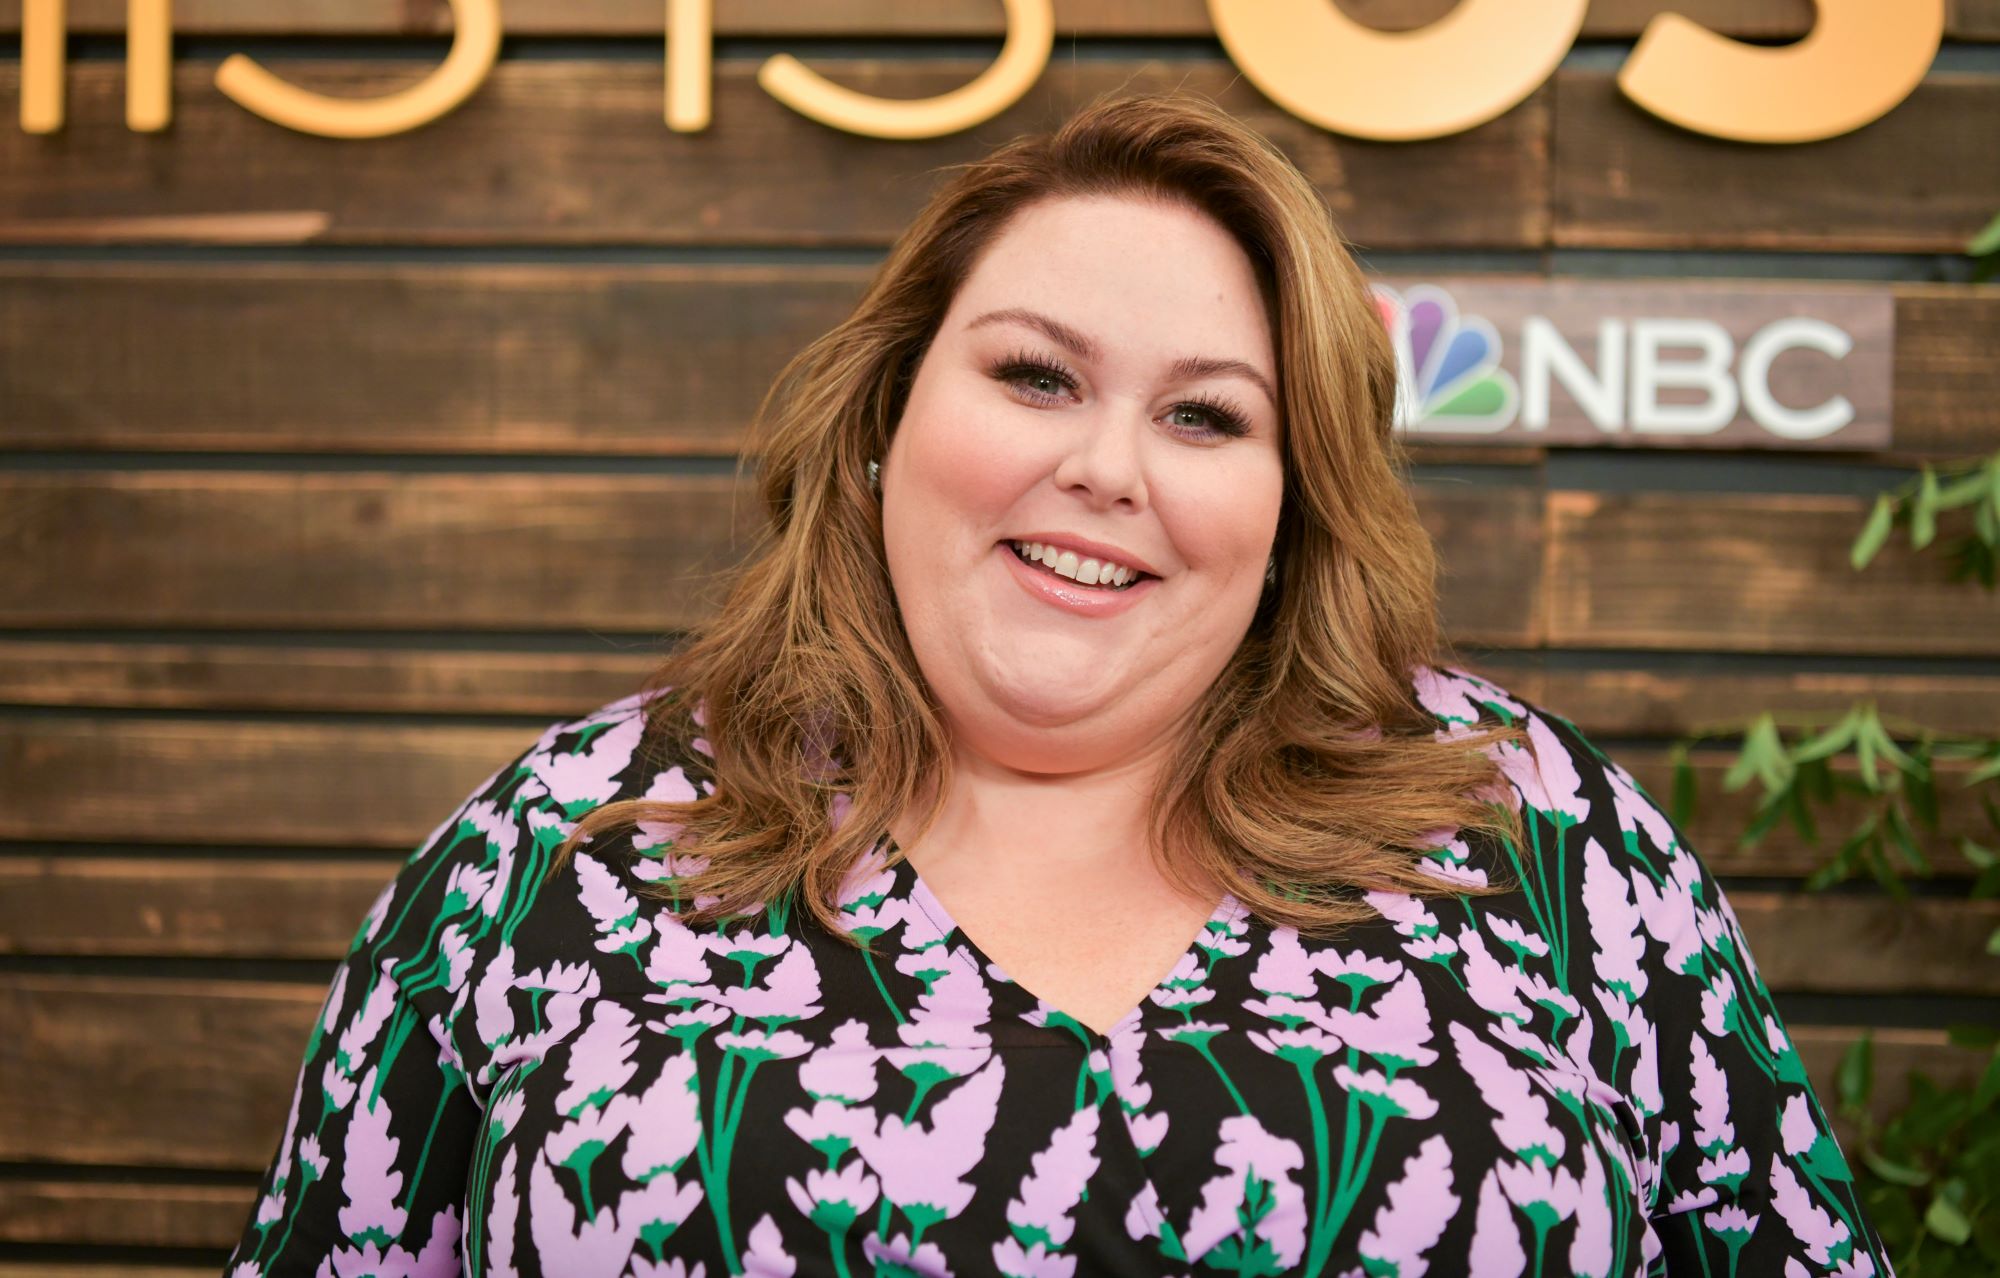 Chrissy Metz, who starred as Kate Pearson in 'This Is Us' on NBC, wears